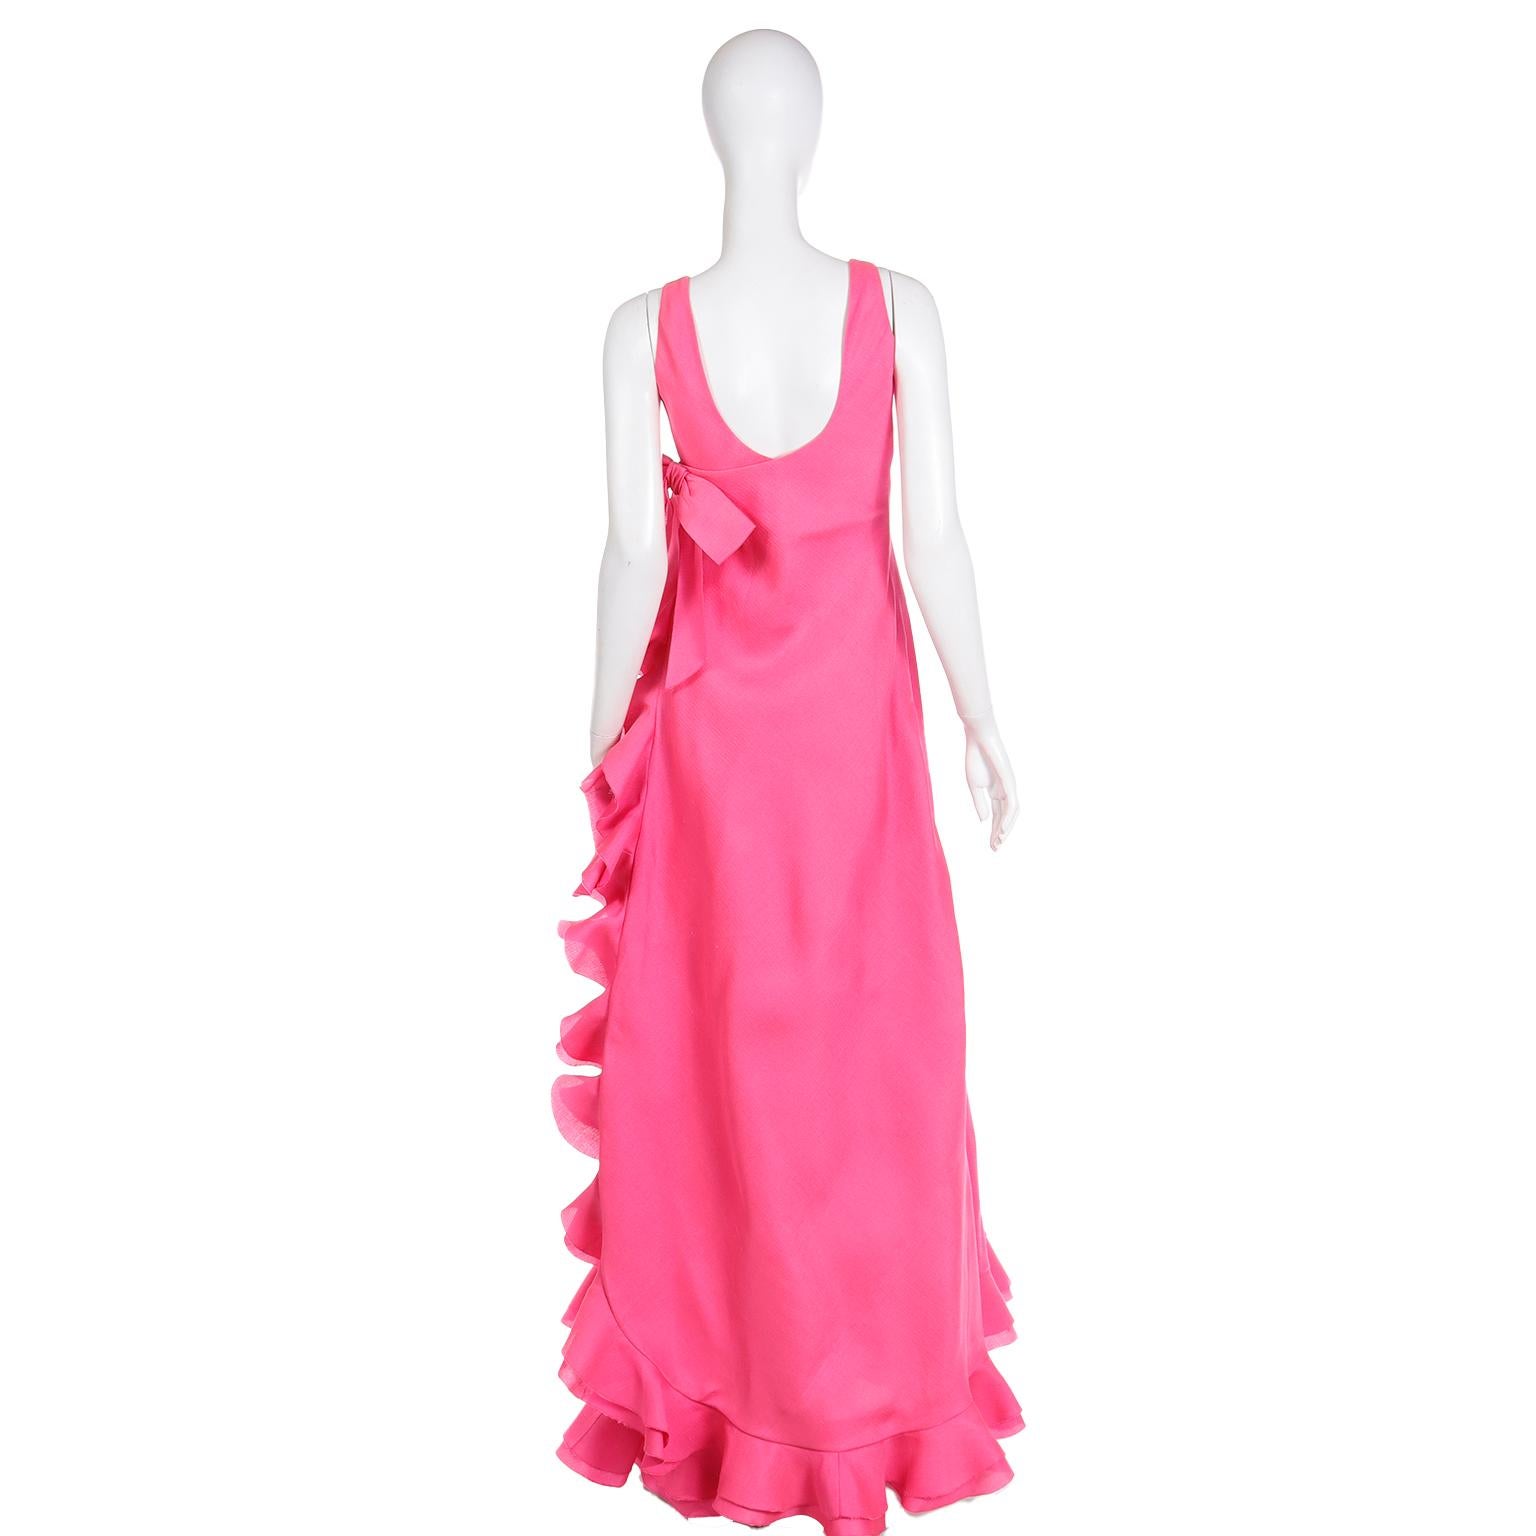 1971 Christian Dior Haute Couture Pink Ruffled Runway Evening Dress Grace Kelly  For Sale 7